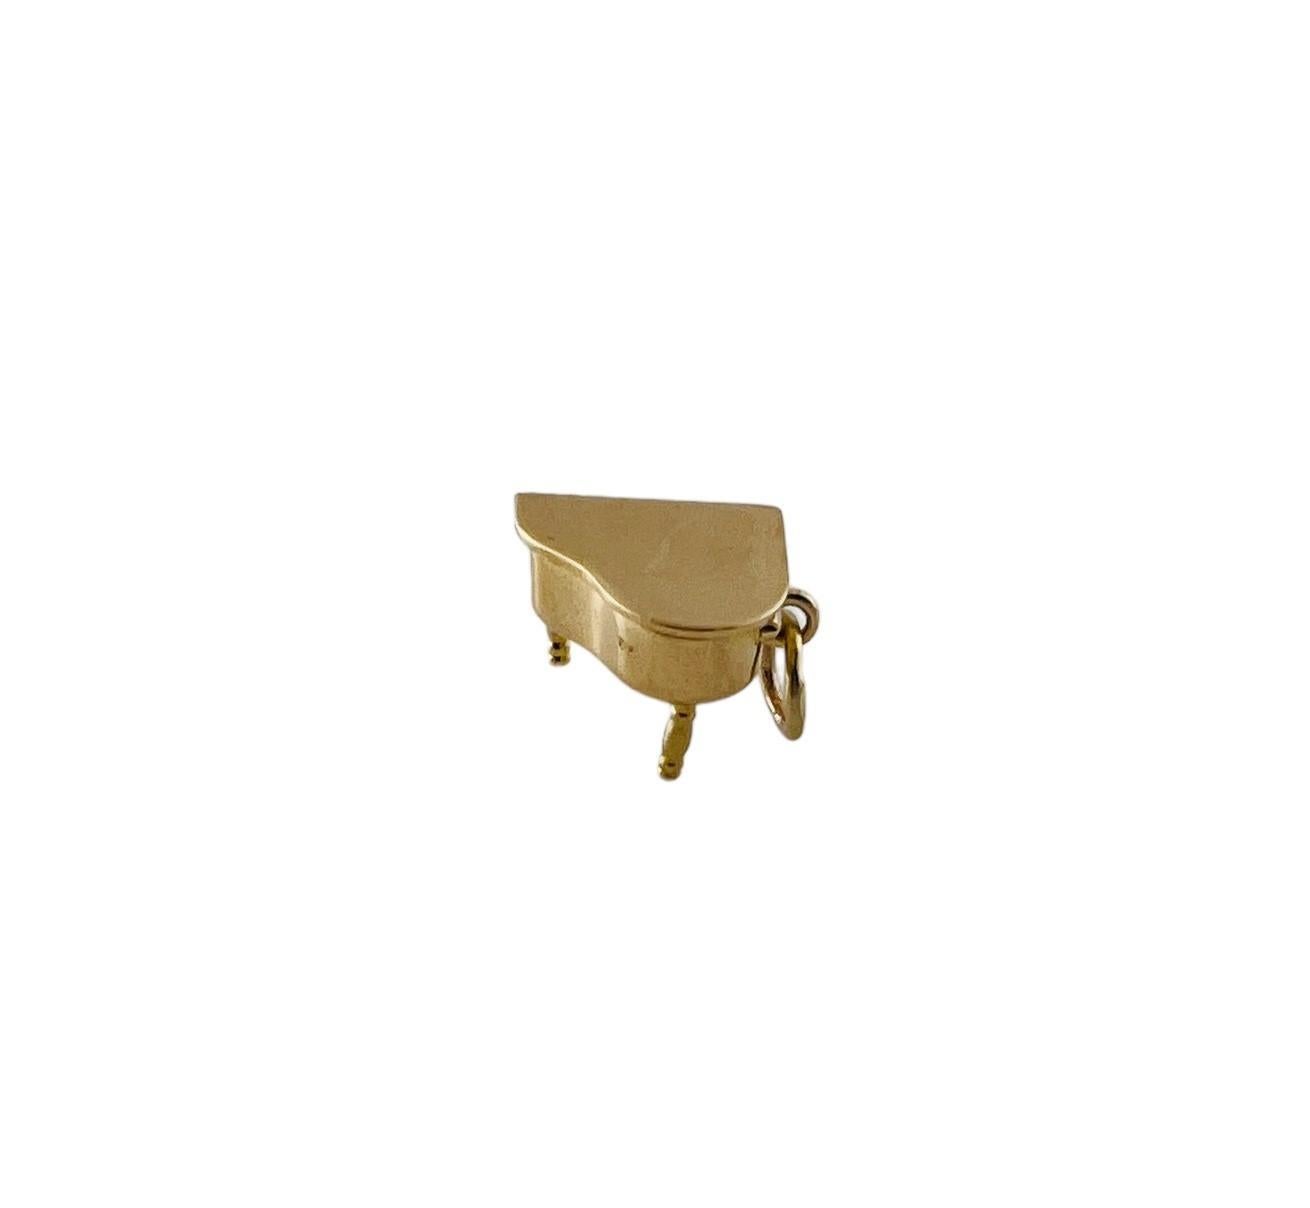 14K Yellow Gold Baby Grand Piano Charm Pendant

This beautiful piano charm is set in 14K yellow gold. The top lifts up to reveal the inside of the piano

Pendant is approx. 12 x 13 x 9.1 mm

2.74 g / 1.8 dwt

Stamped 14K 

*Does not come with